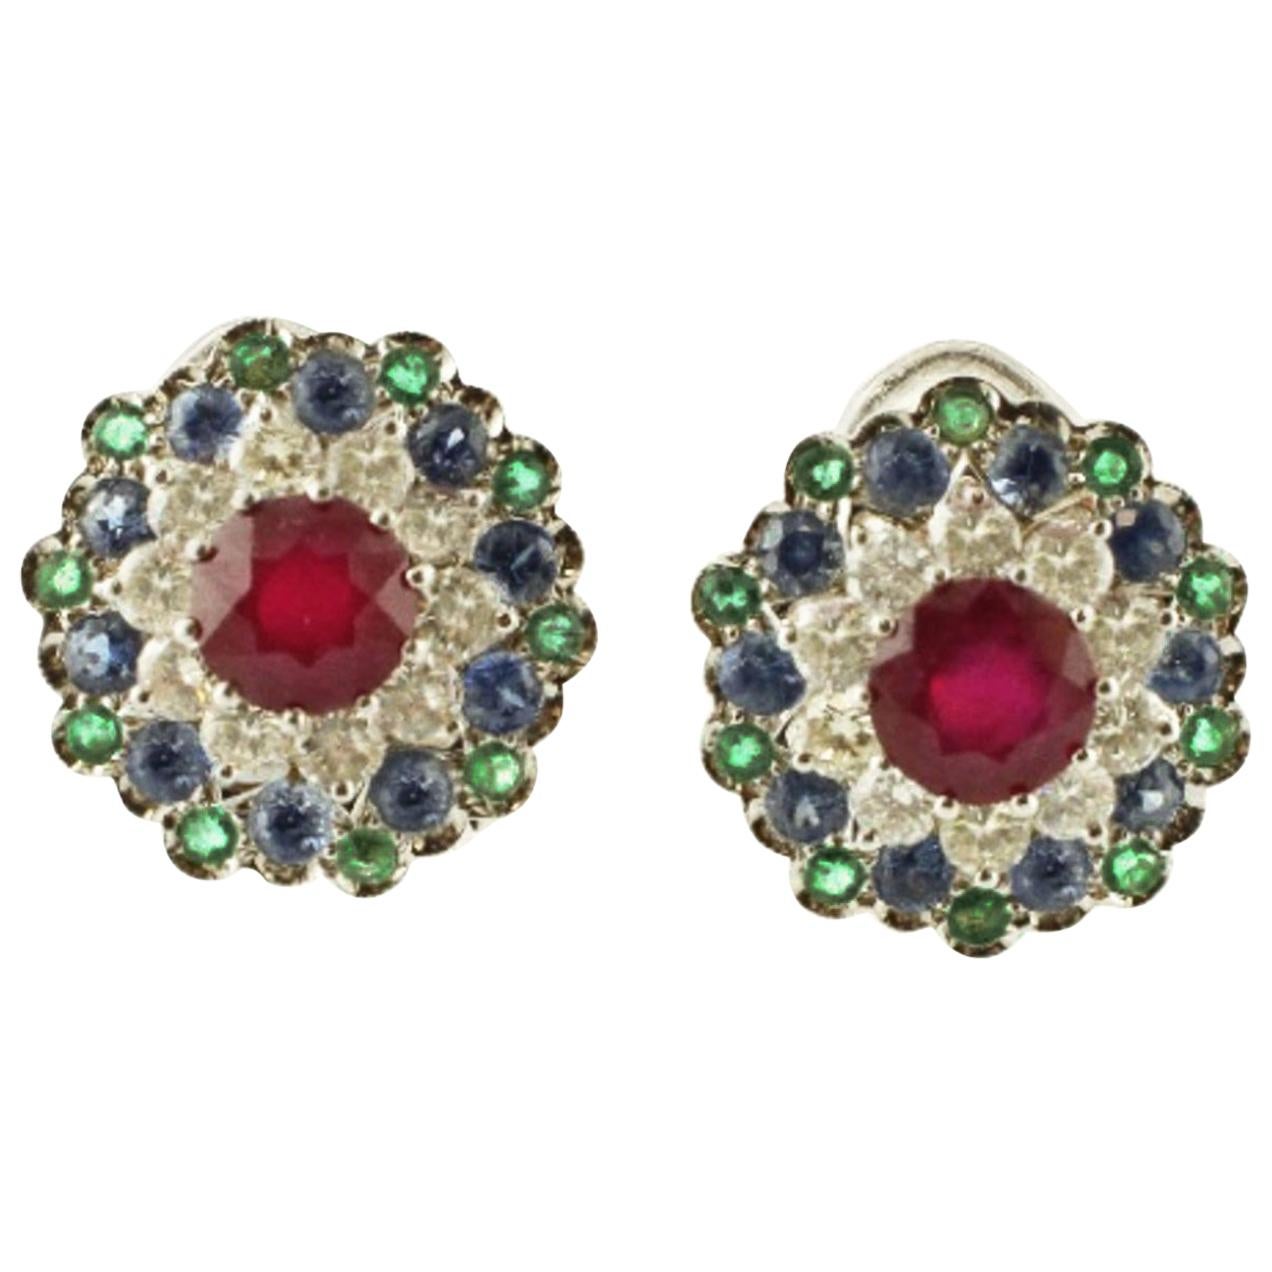 Central Ruby, Diamonds, Sapphires and Emeralds 14 Karat White Gold Stud Earrings For Sale